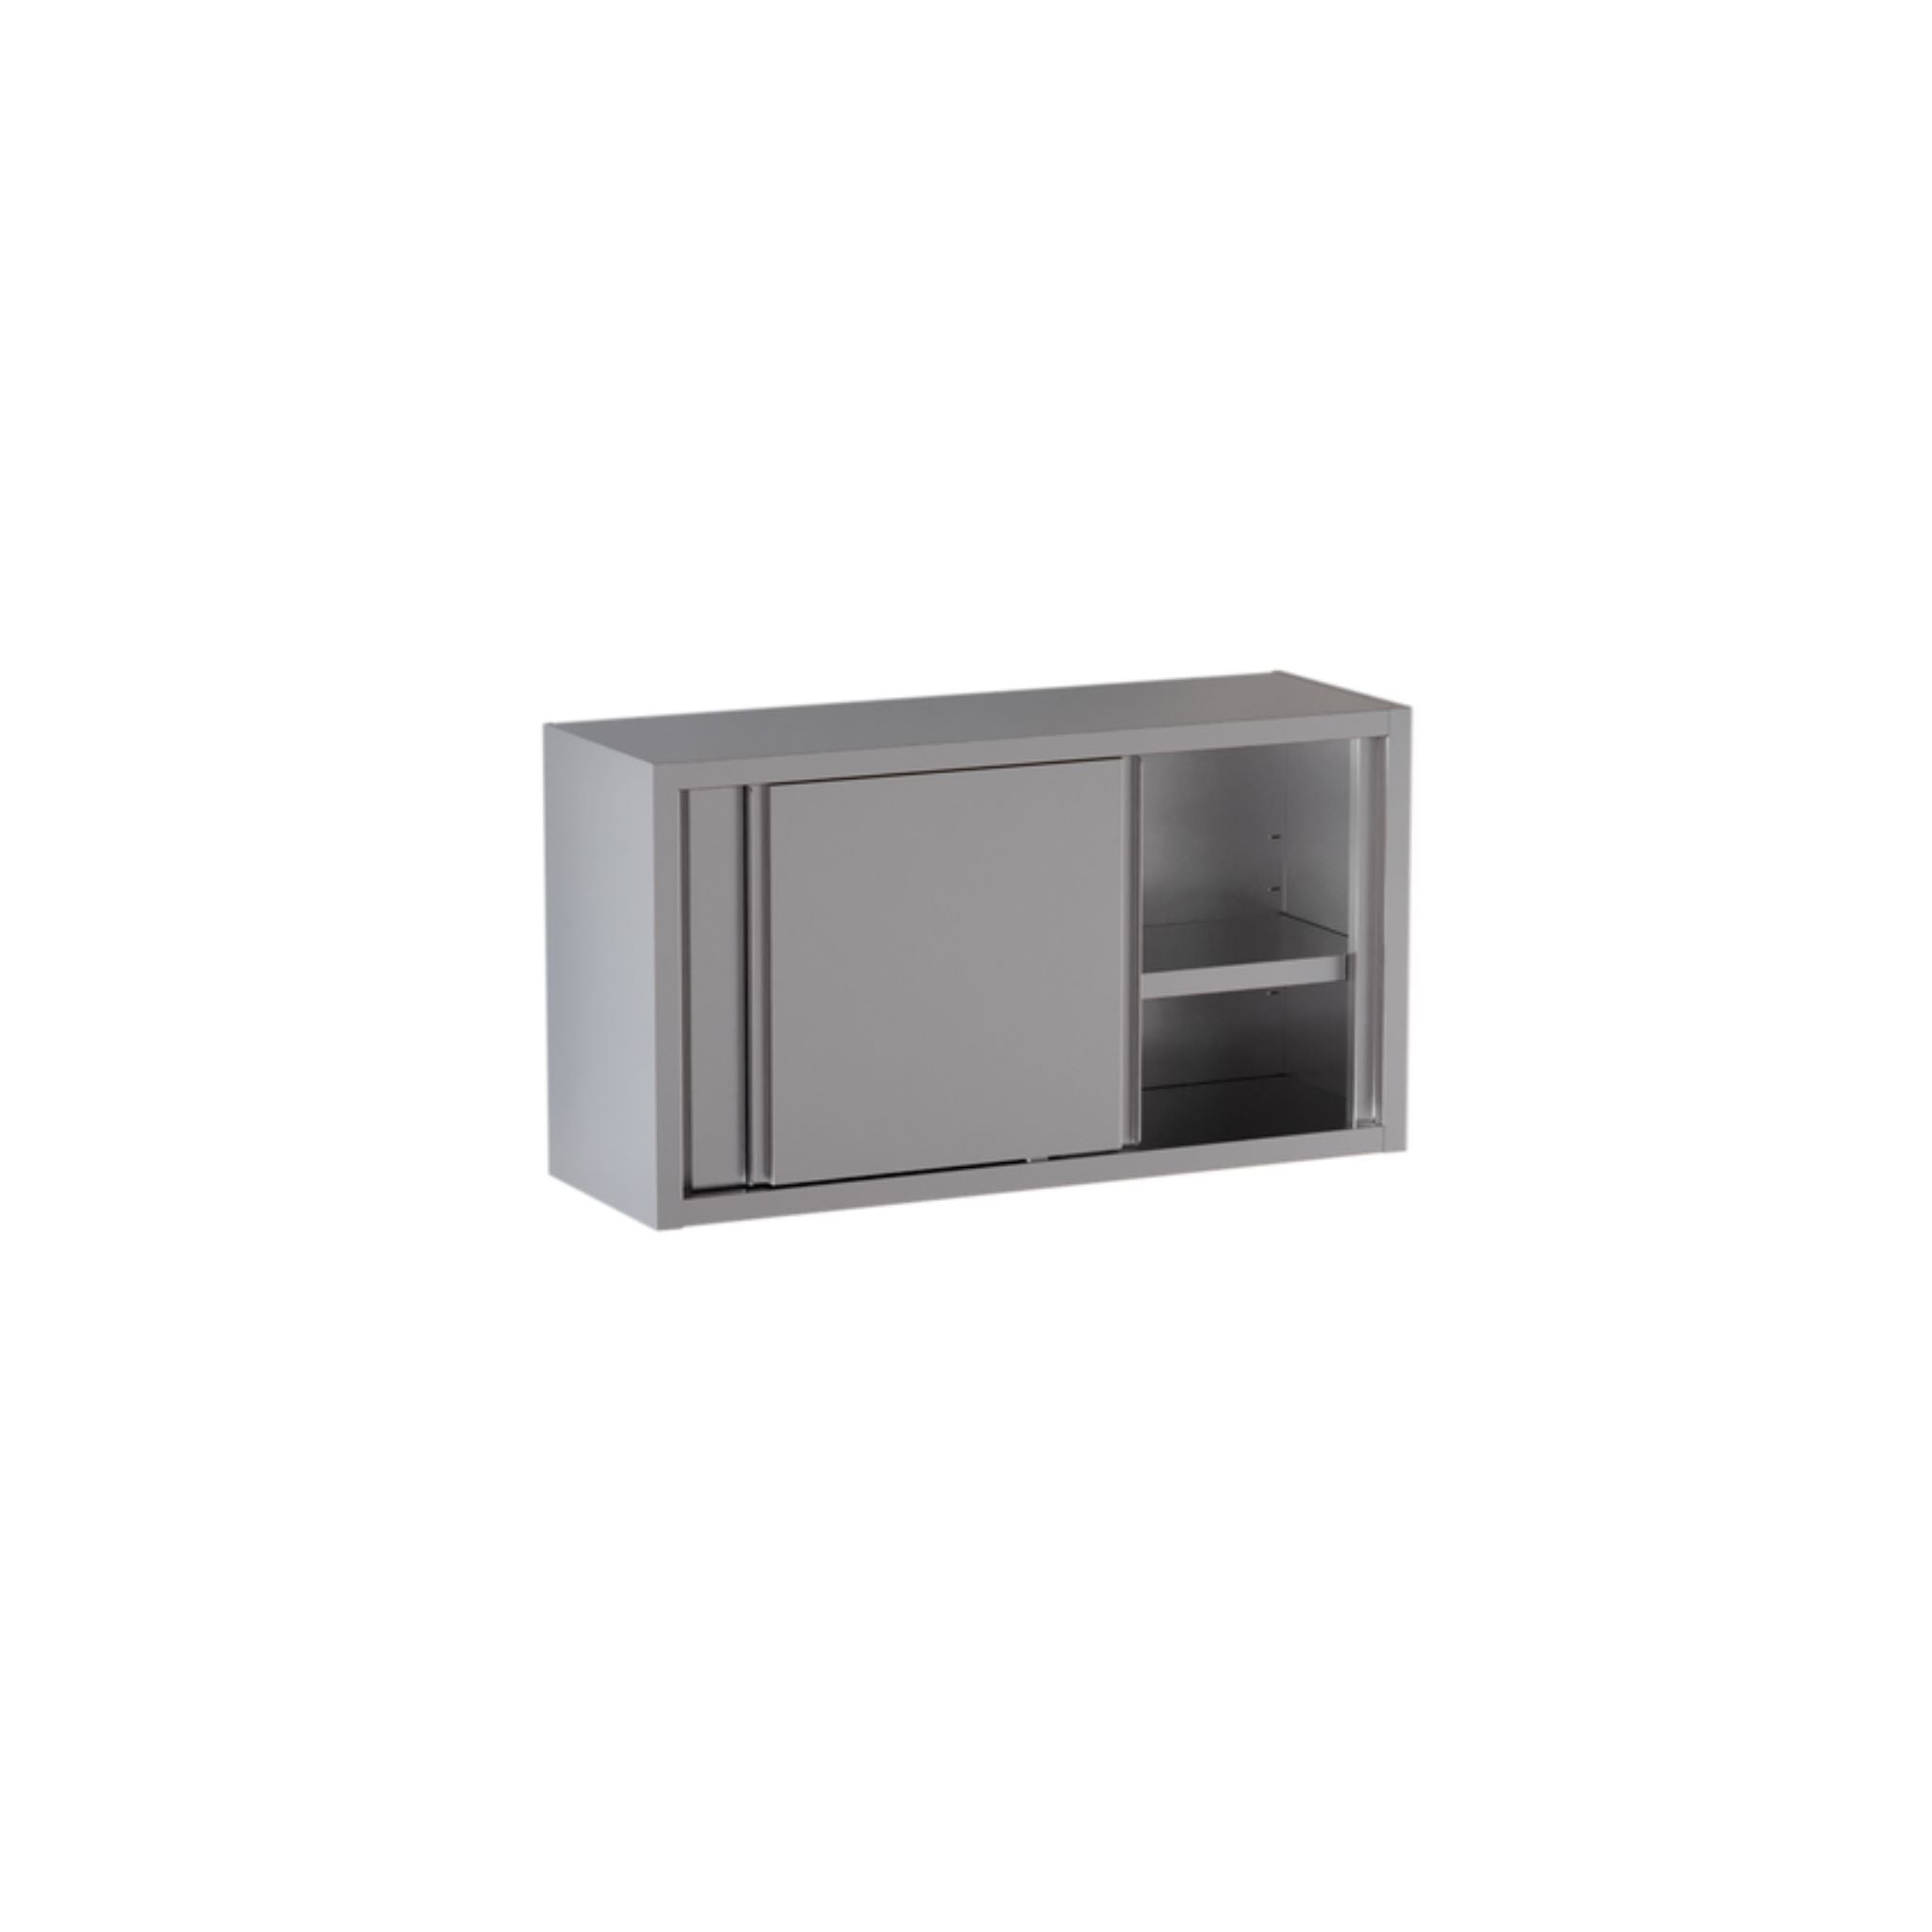 Stainless steel wall cabinet with standard sliding doors